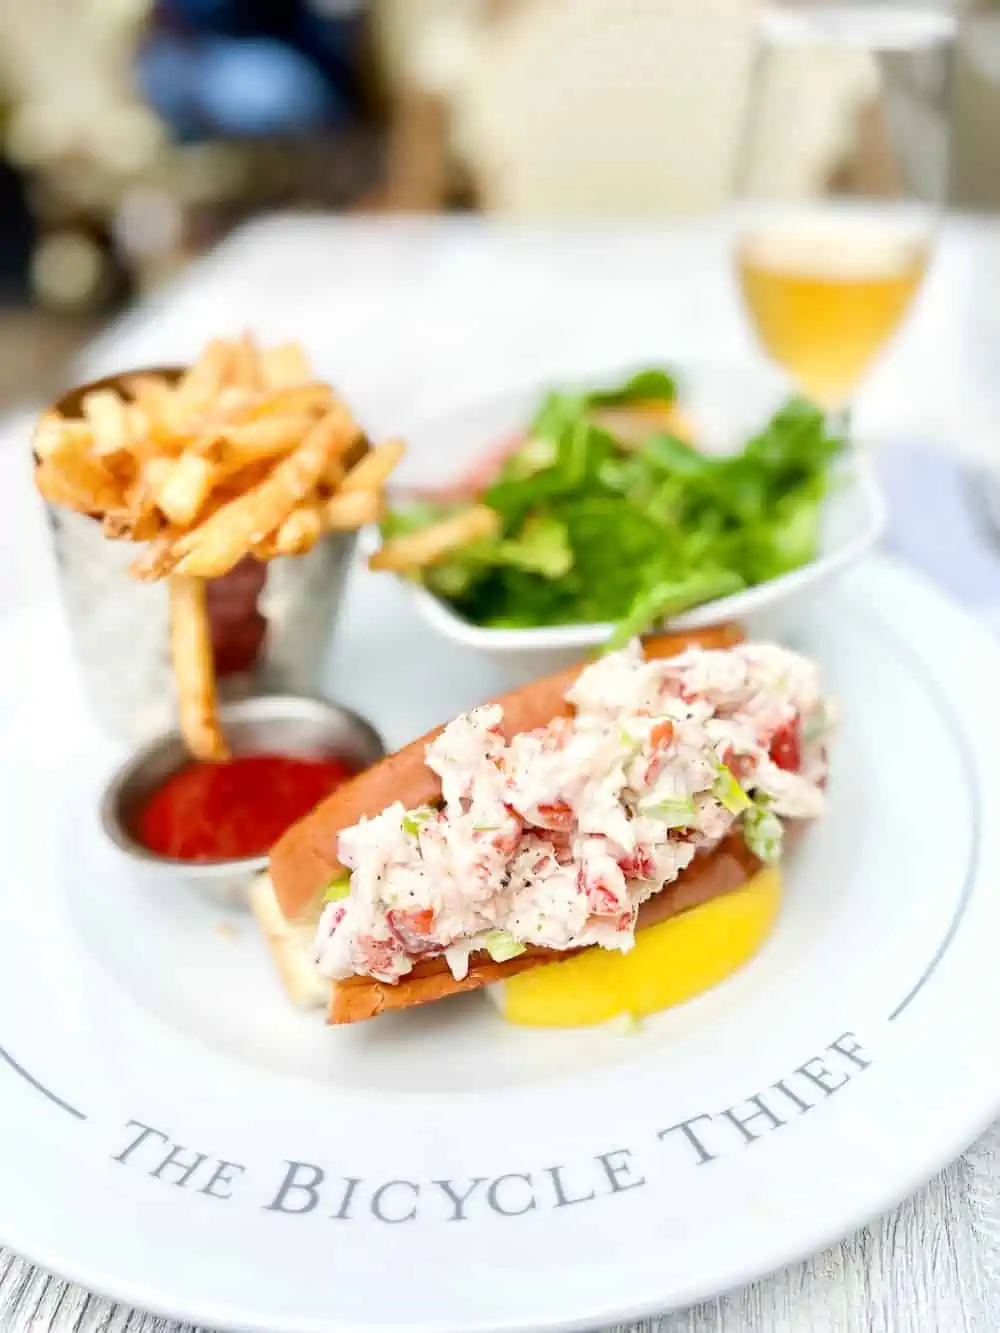 Lobster Roll on white plate with fries and salad in Halifax.